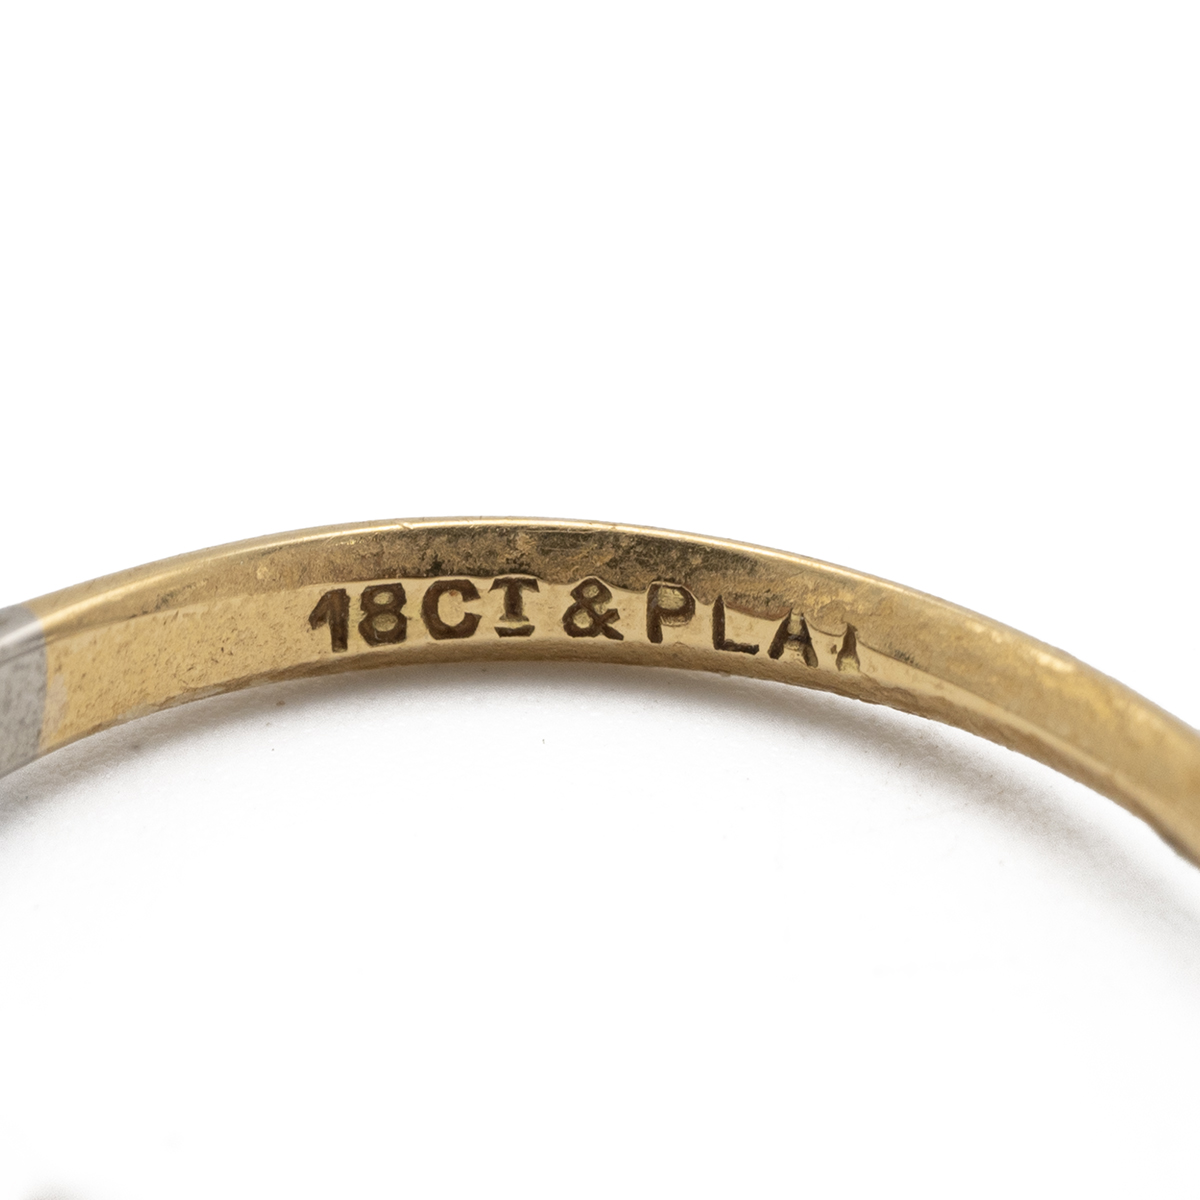 An 18ct gold and illusion set diamond ring, stamped "18ct & PLAT", 2.75 grams, along with 9ct gol... - Image 3 of 3